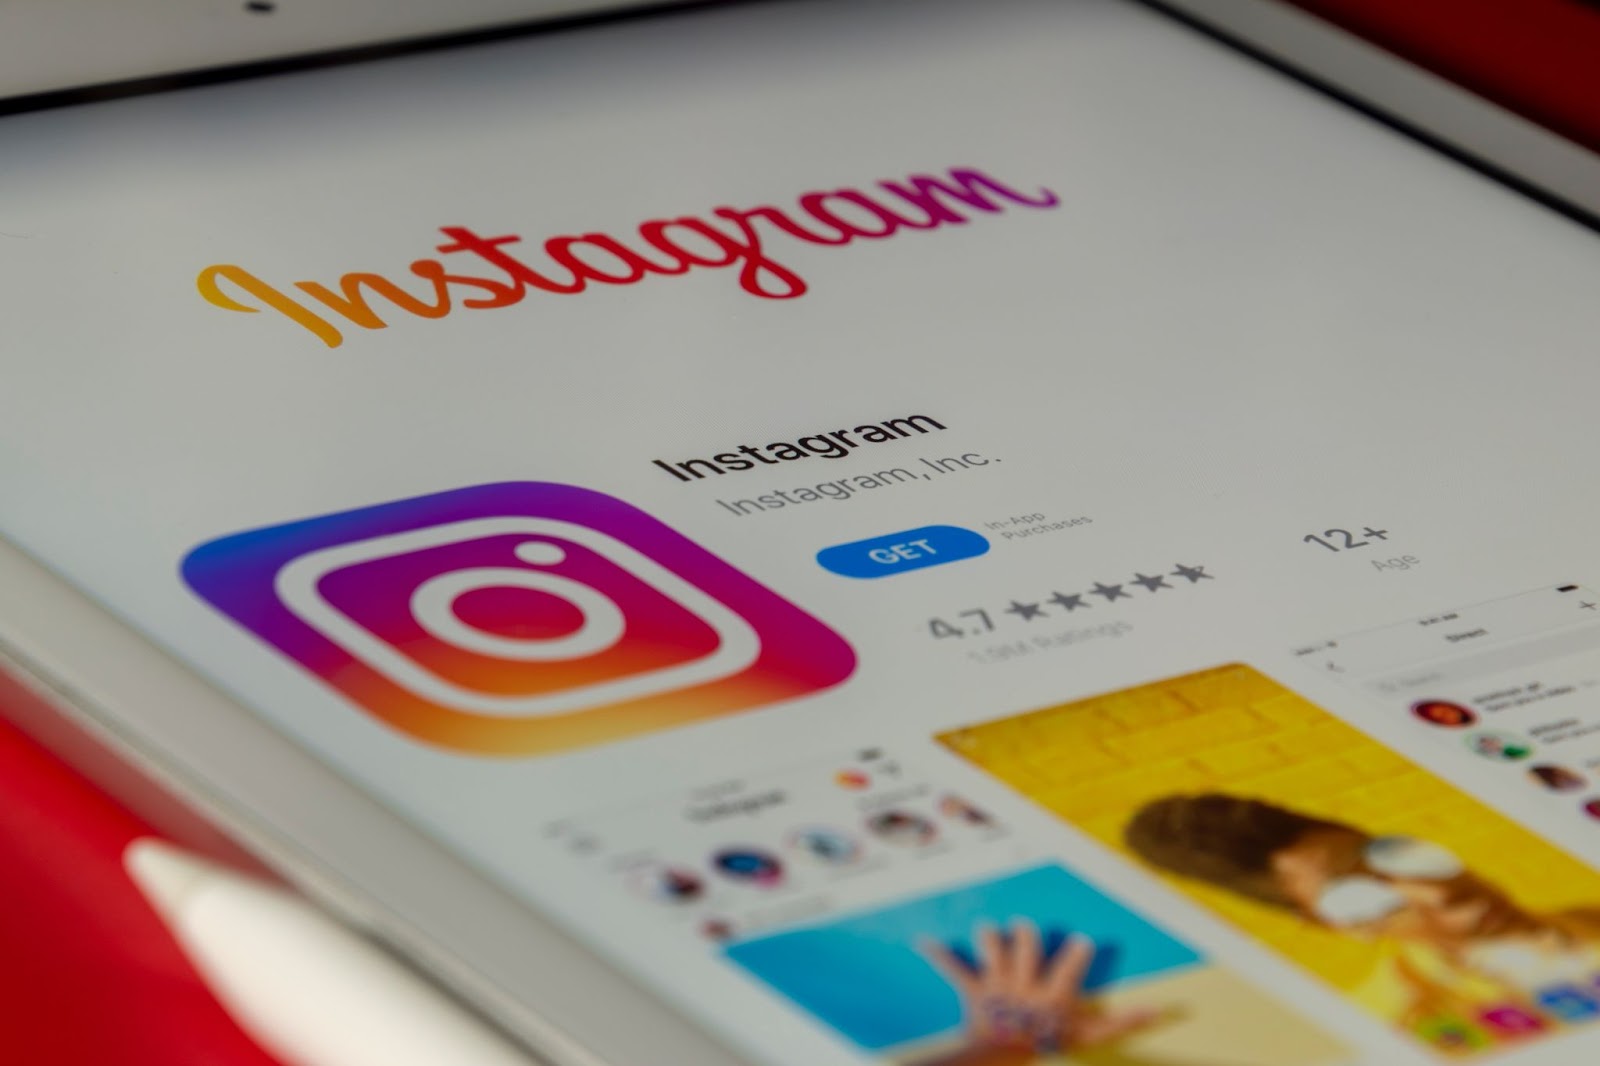 How to Make Your Instagram Profile Perfect